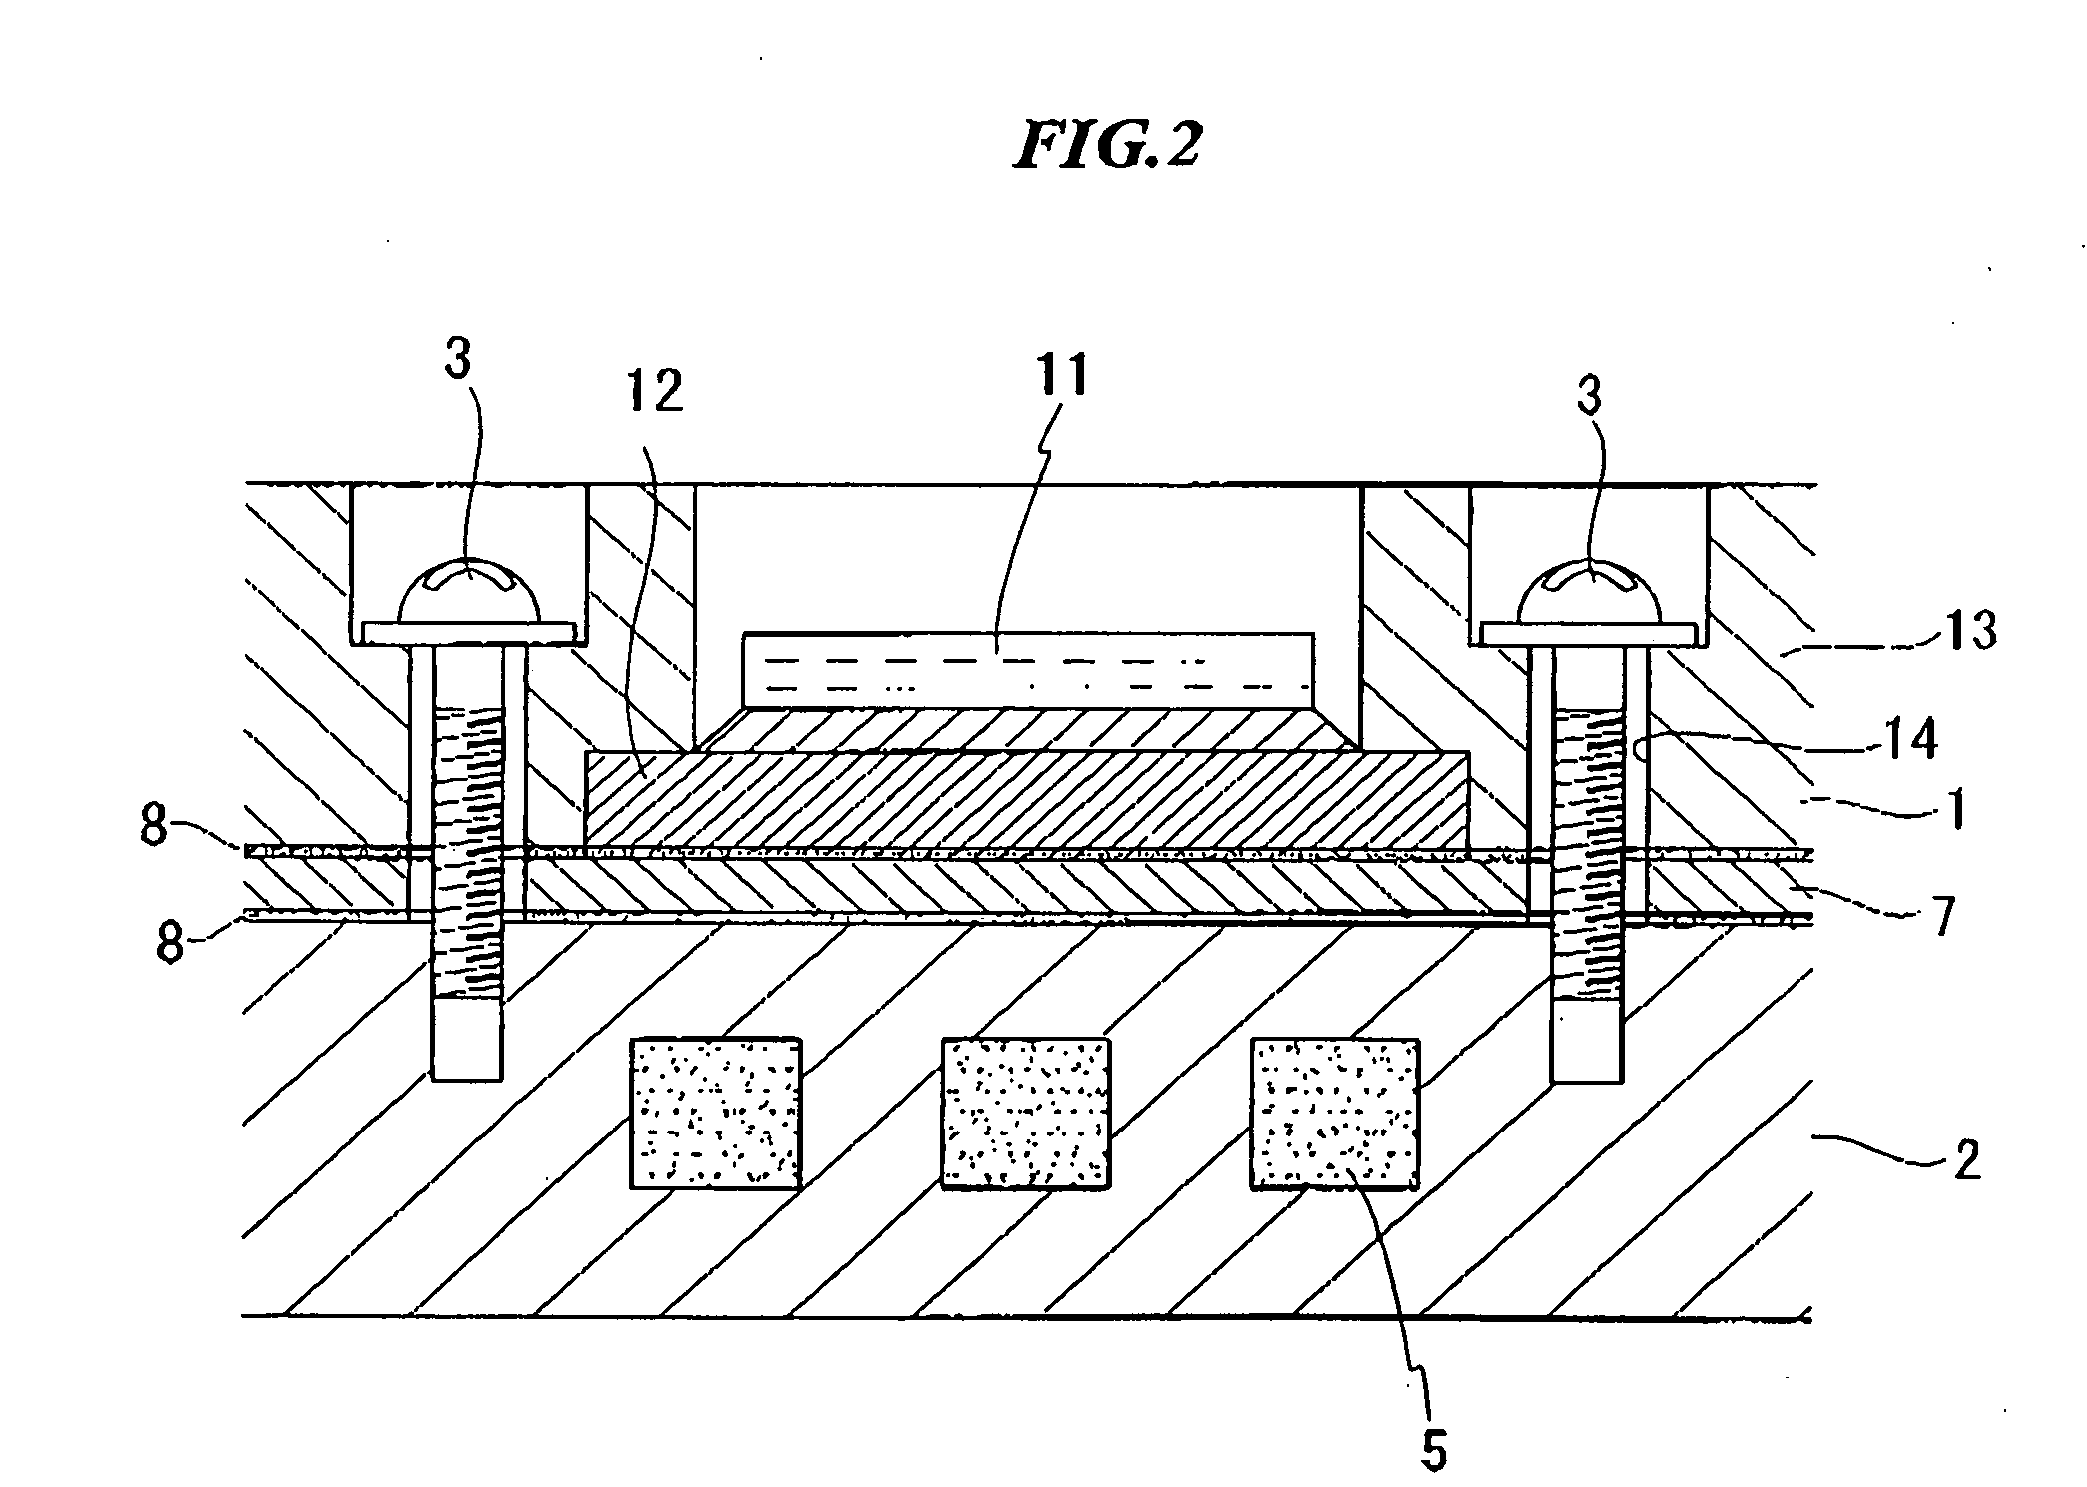 Heat dissipation assembly and method for producing the same